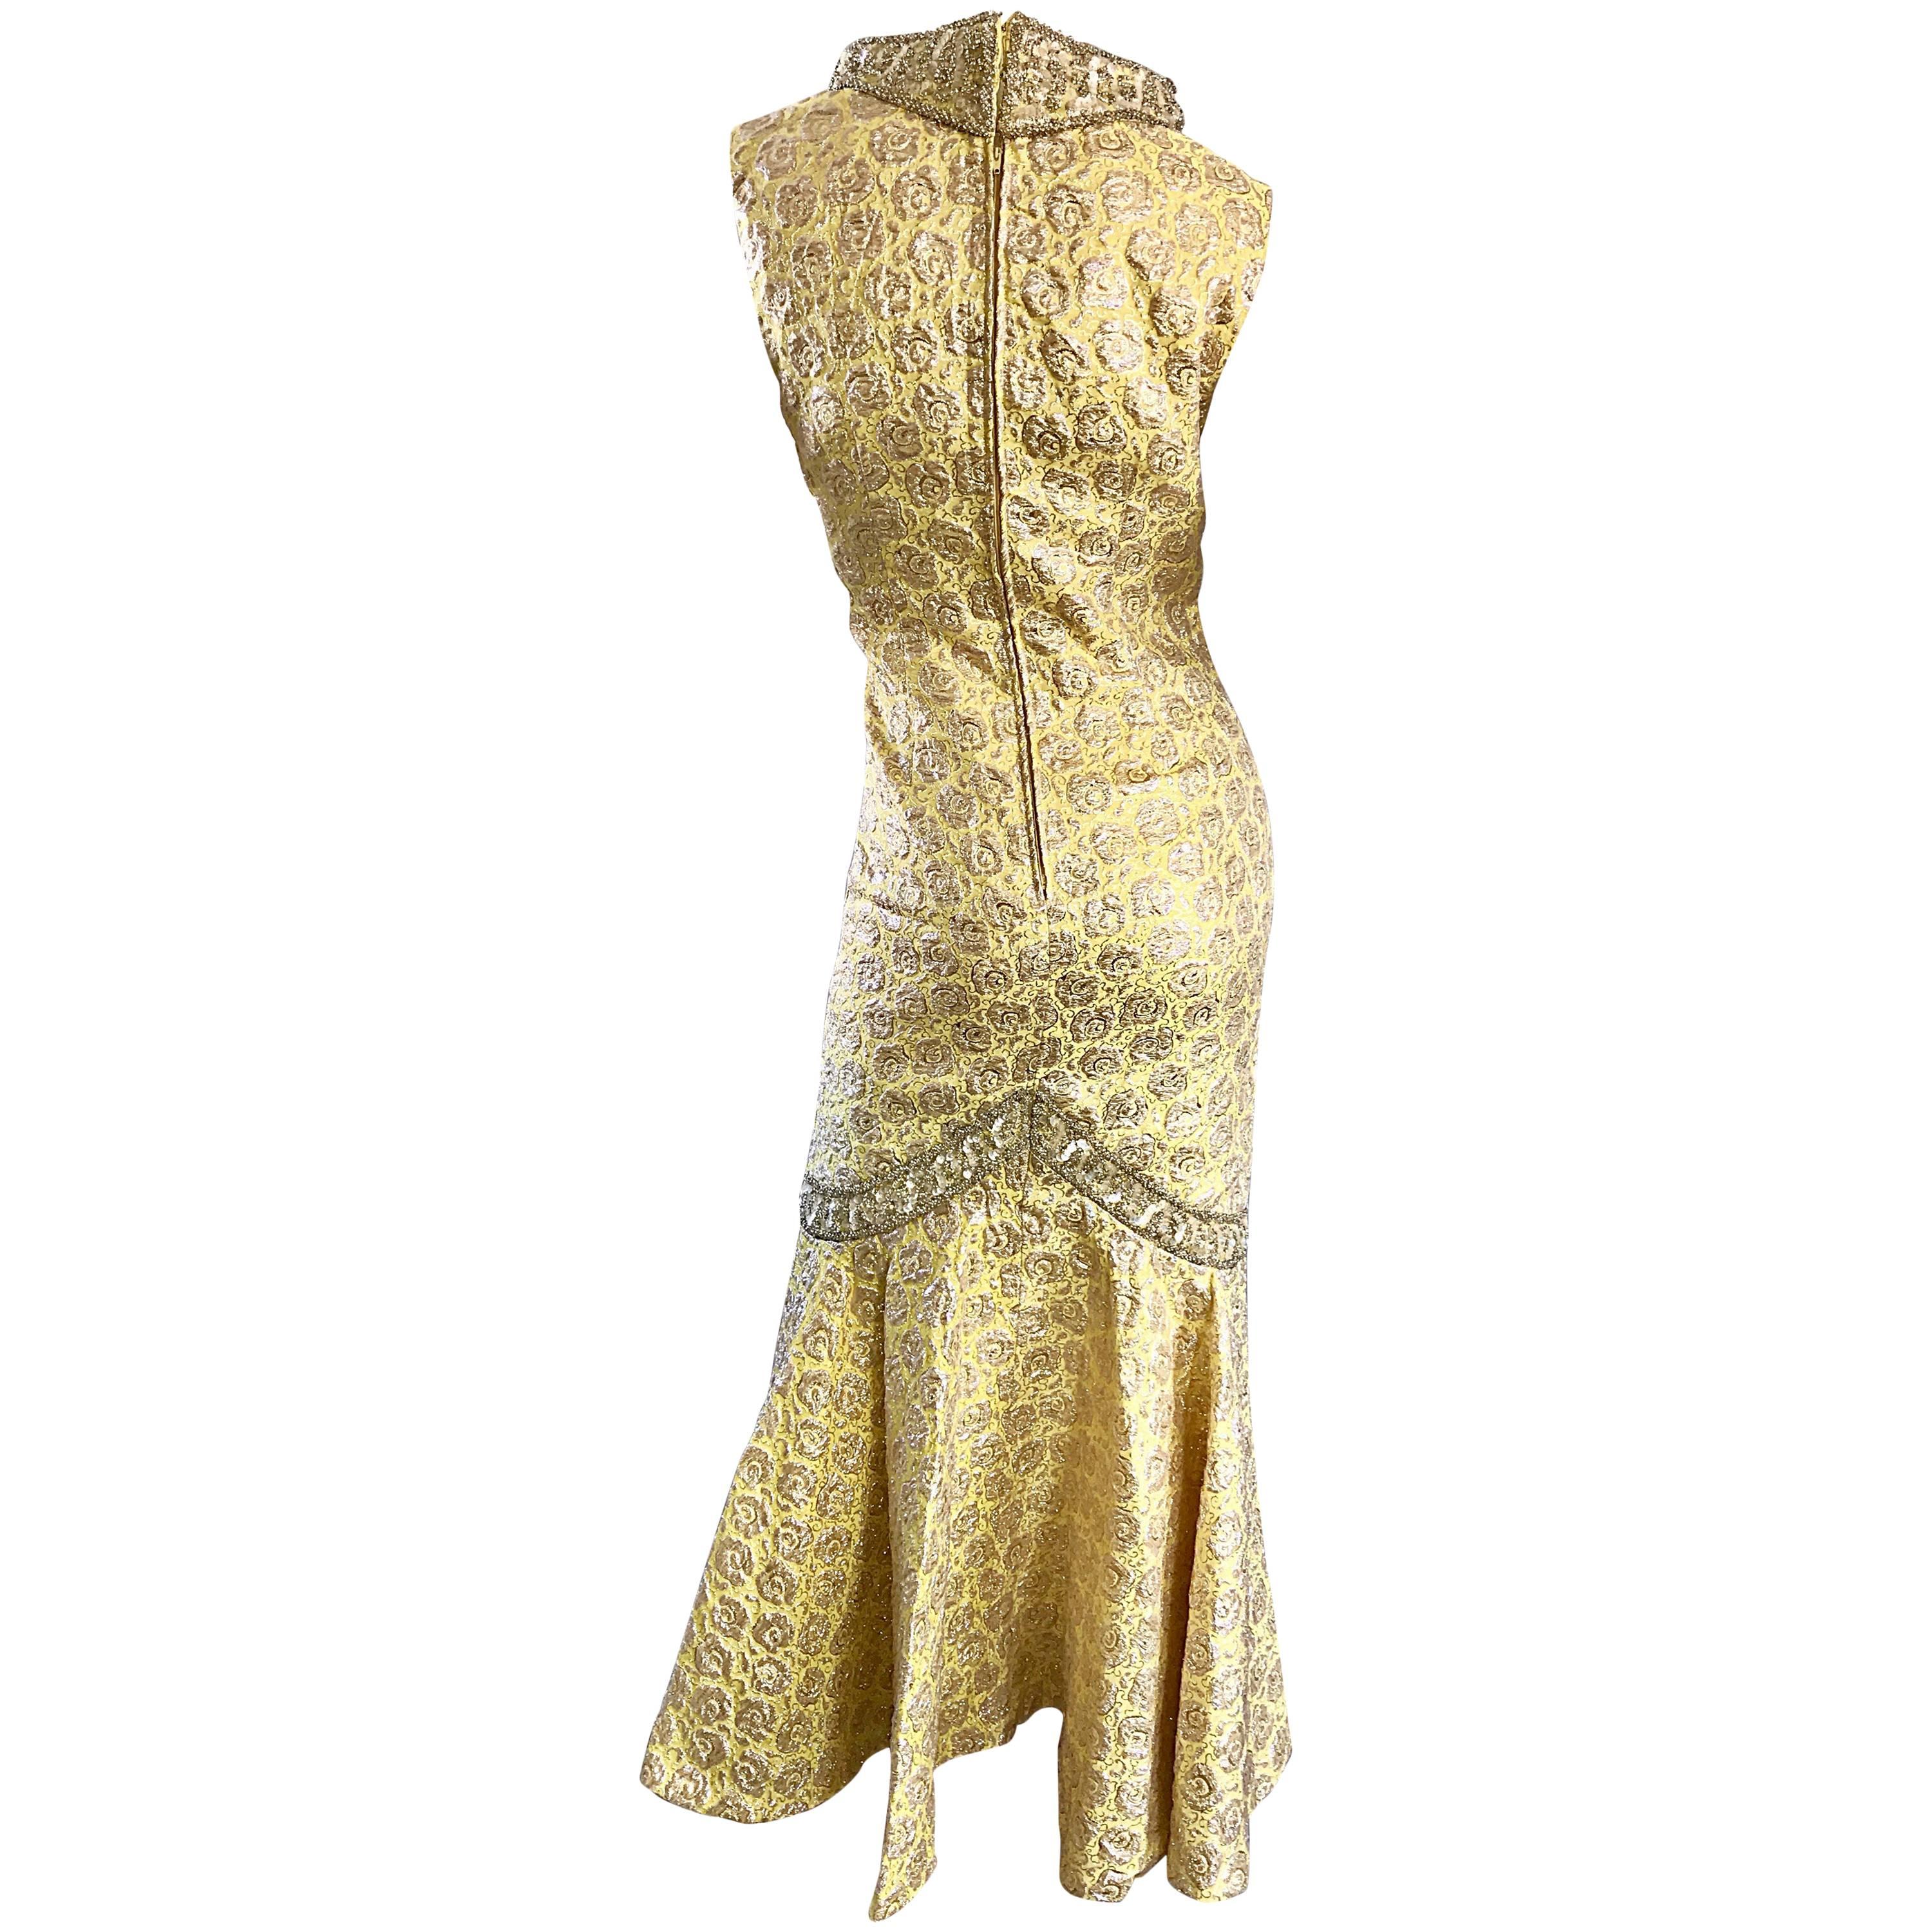 Sensational 1950s Demi Couture Yellow Beaded Silk Brocade Vintage Mermaid Gown For Sale